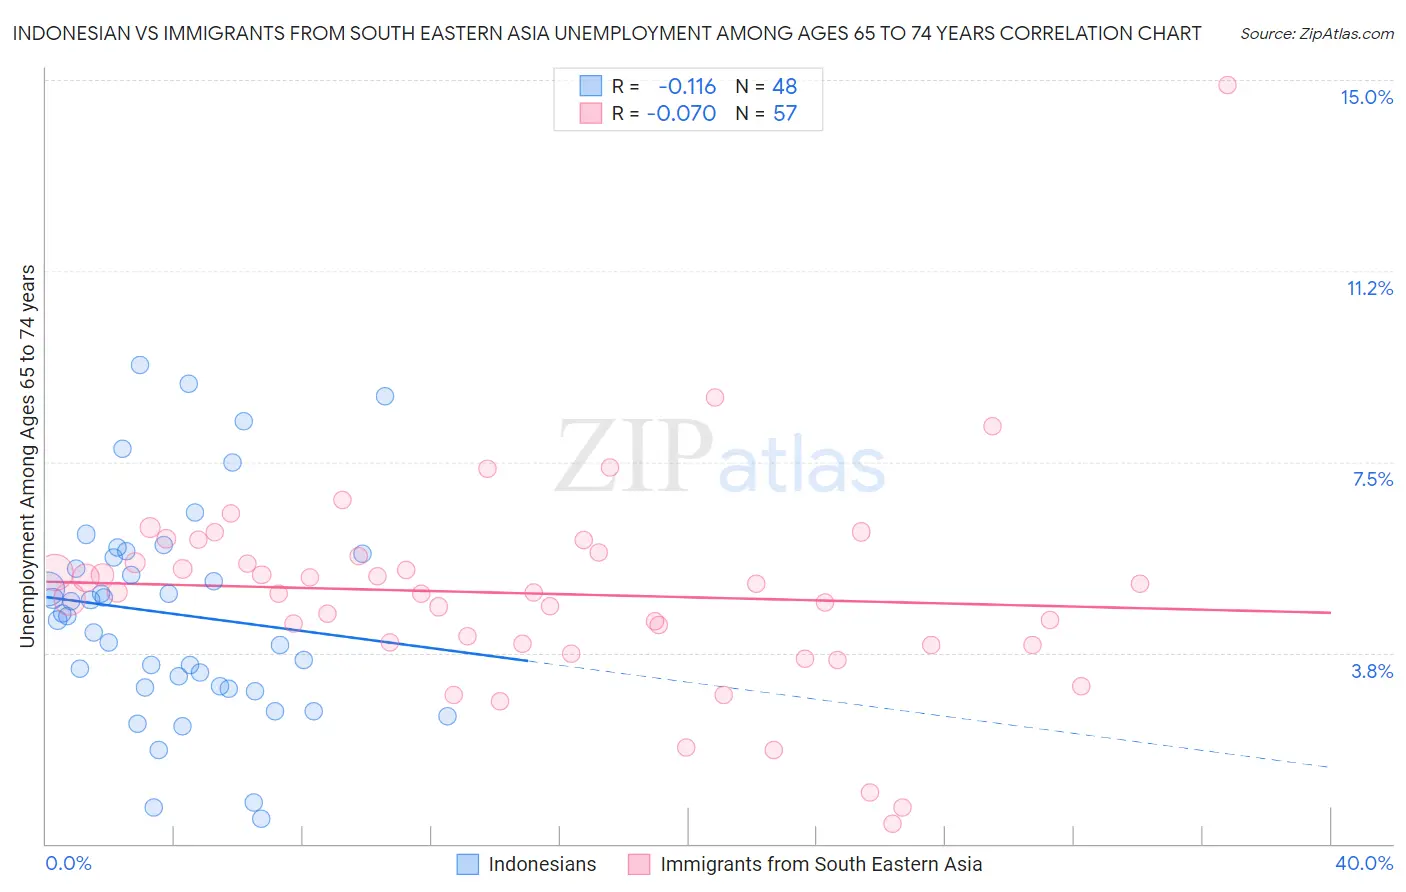 Indonesian vs Immigrants from South Eastern Asia Unemployment Among Ages 65 to 74 years